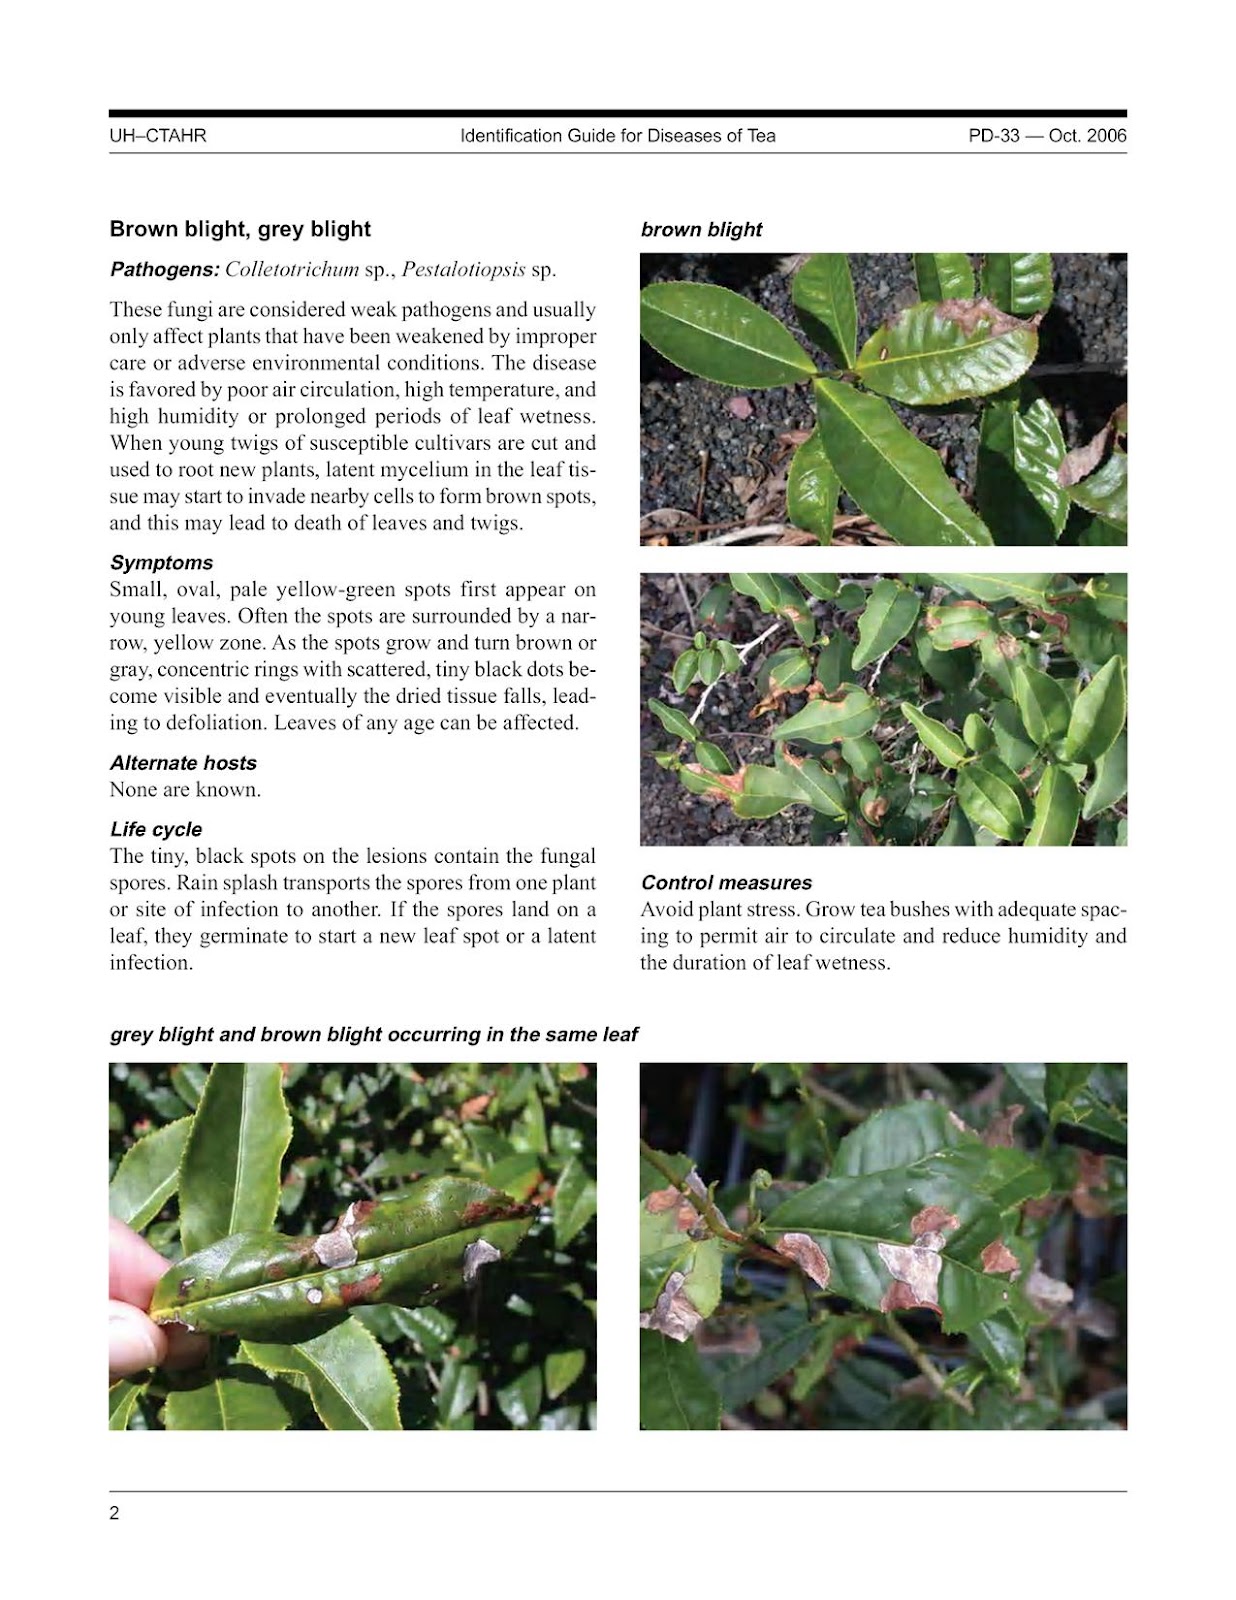 AGRICULTURAL MICROBIOLOGY: GREY BLIGHT OF TEA